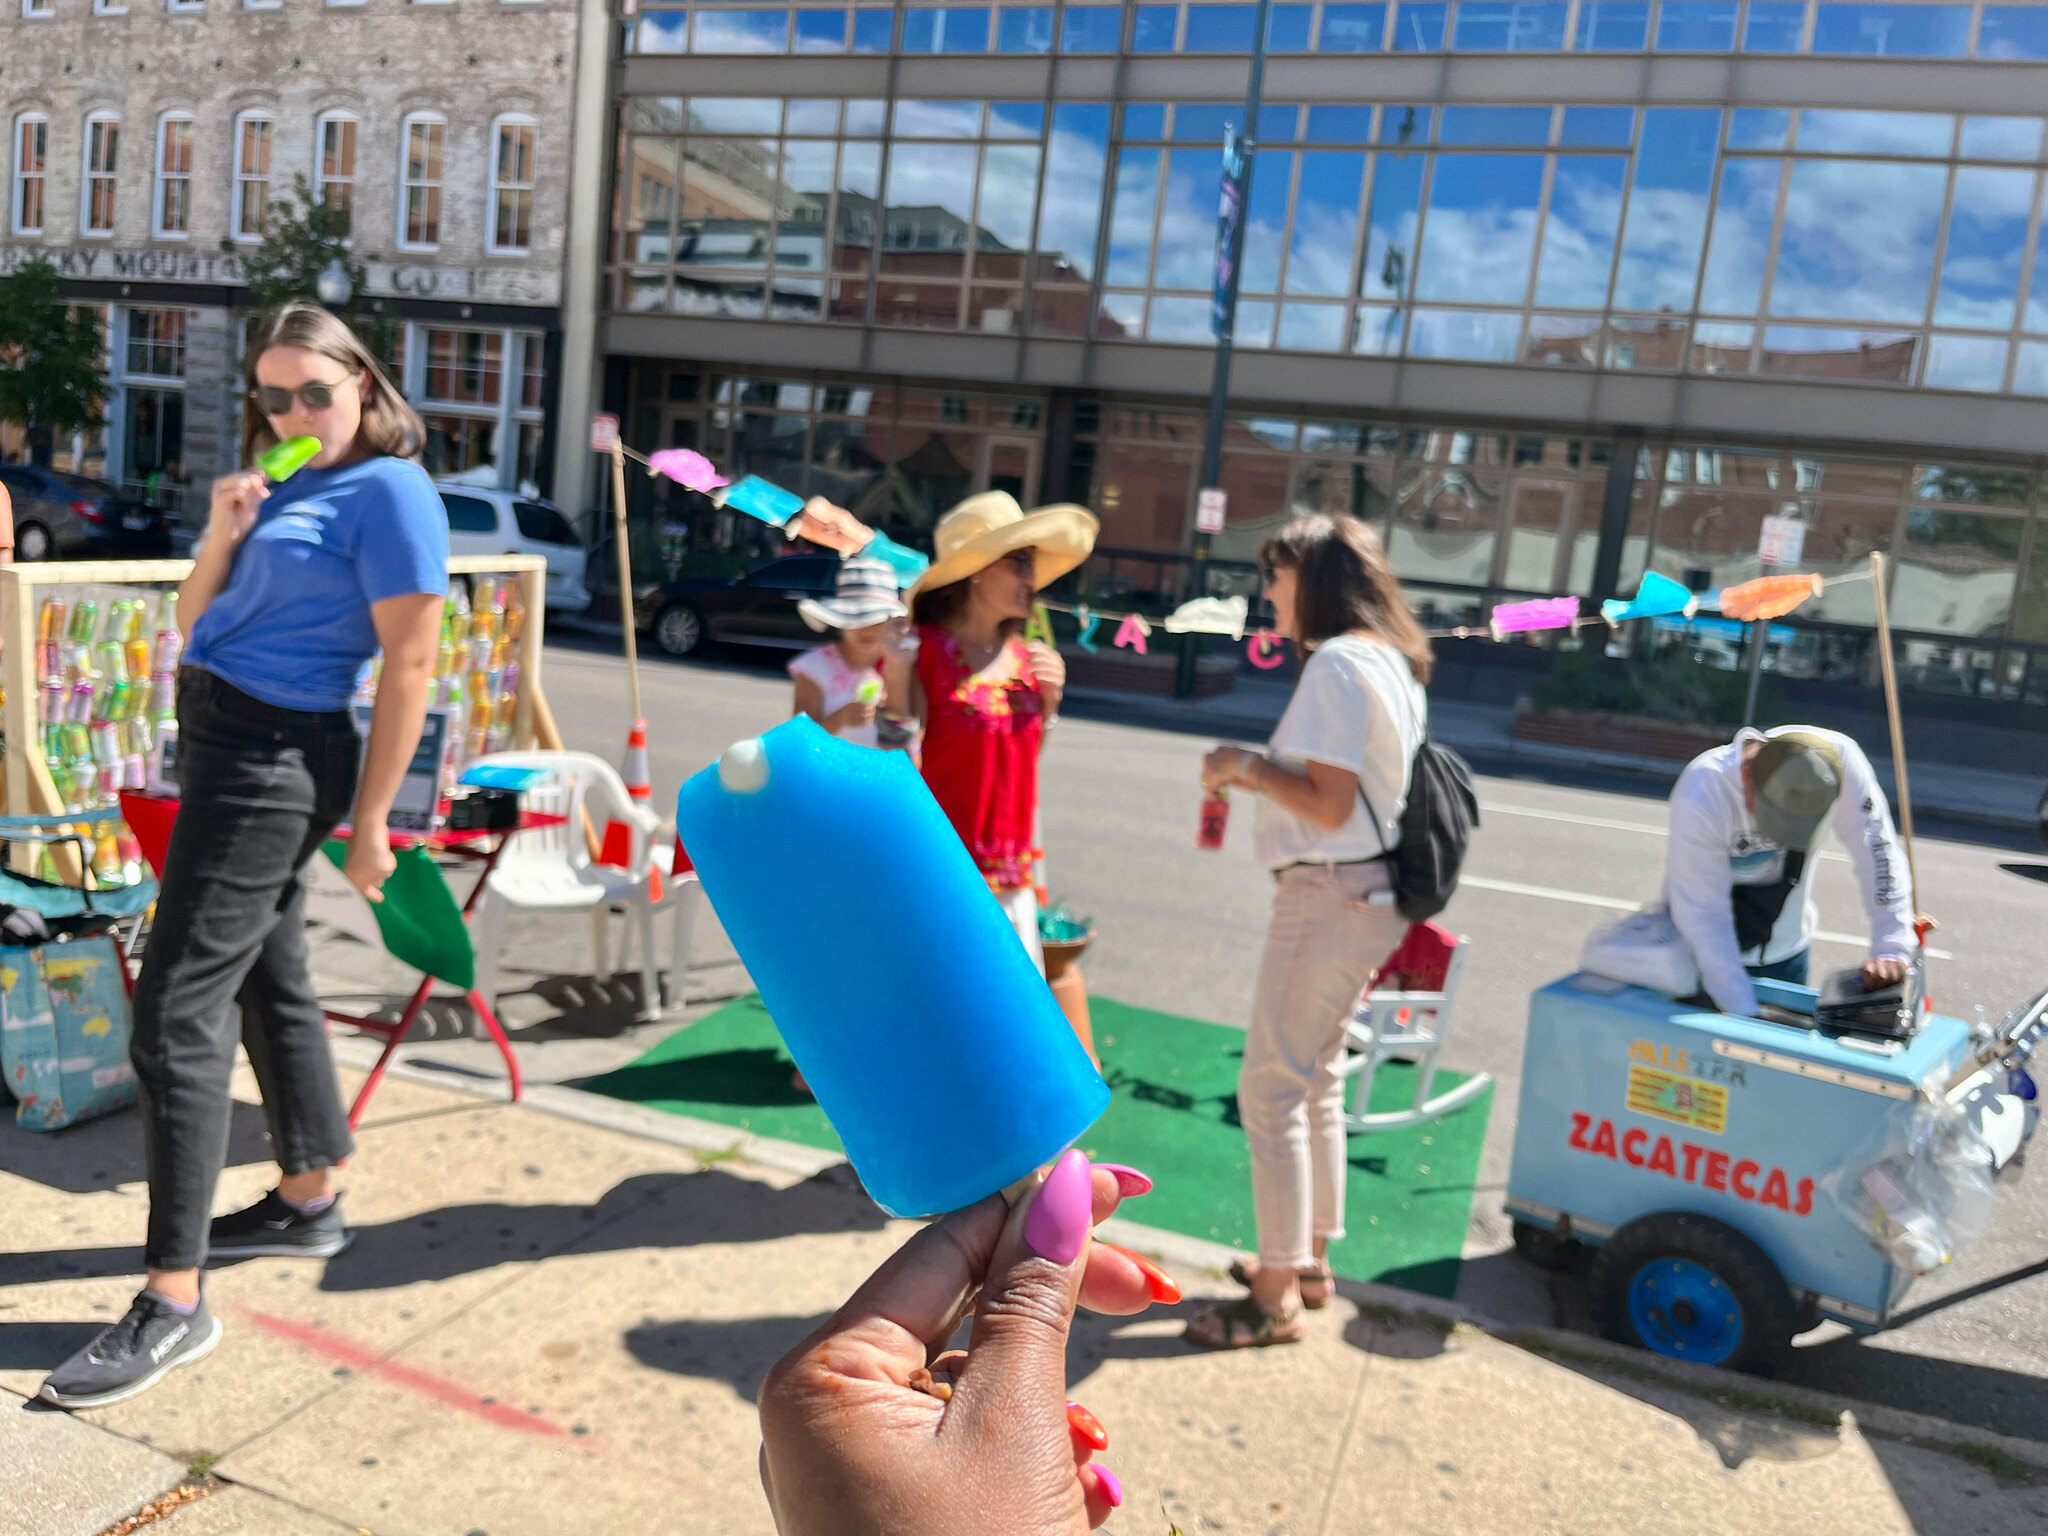 A hand holding a popsicle with a parklet in the background with a small popsicle cart and people enjoying.